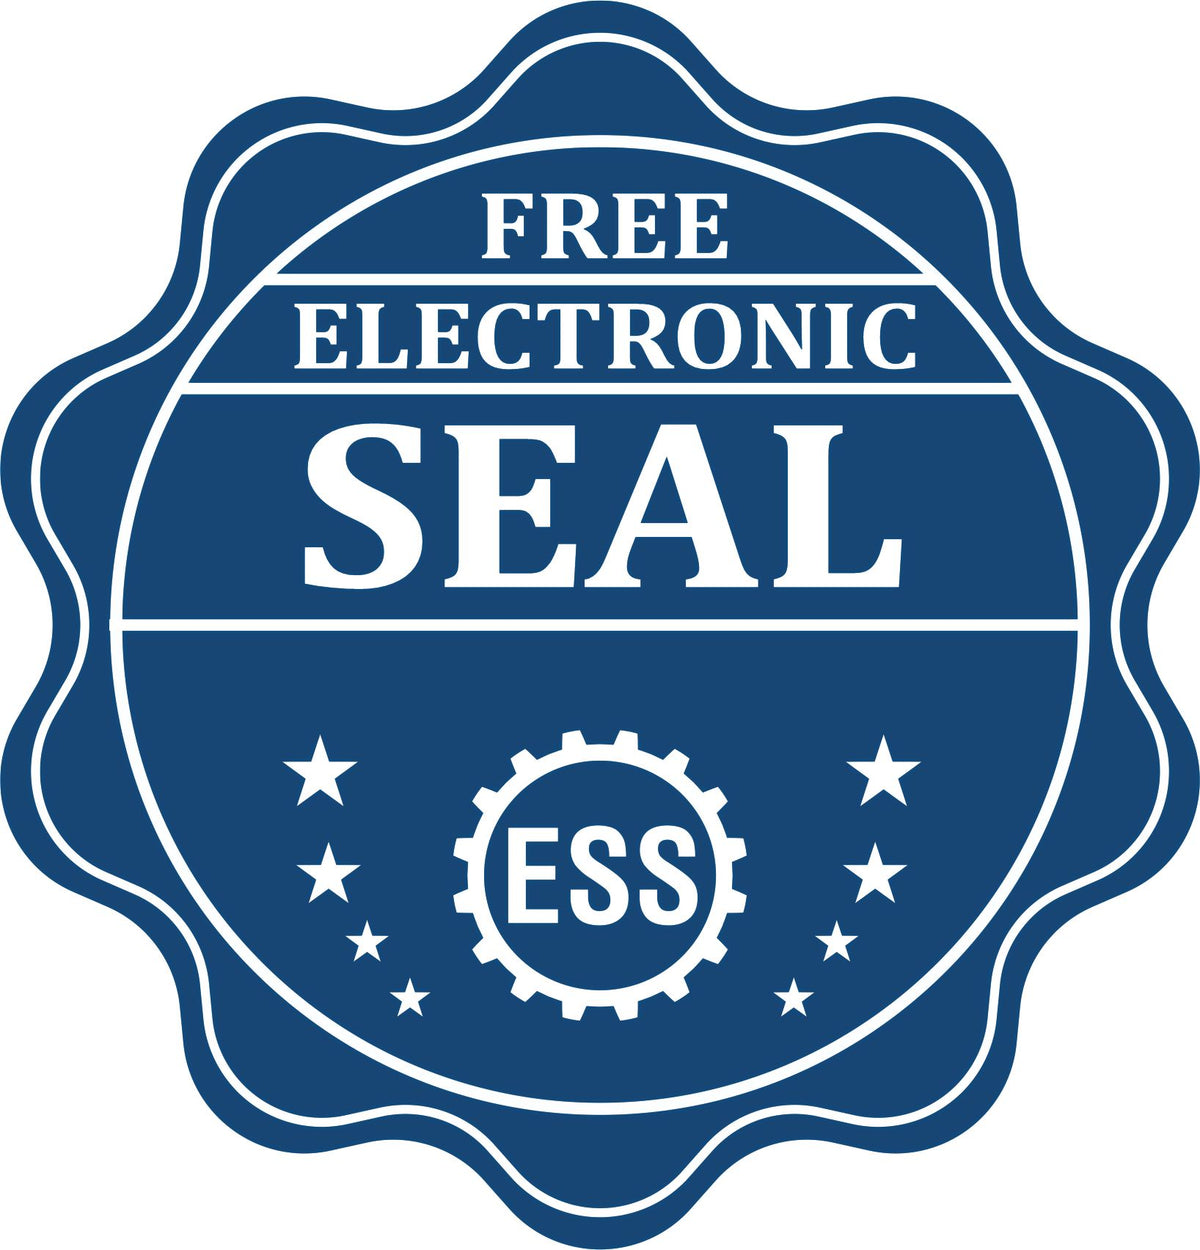 A badge showing a free electronic seal for the Slim Pre-Inked Kansas Professional Engineer Seal Stamp with stars and the ESS gear on the emblem.